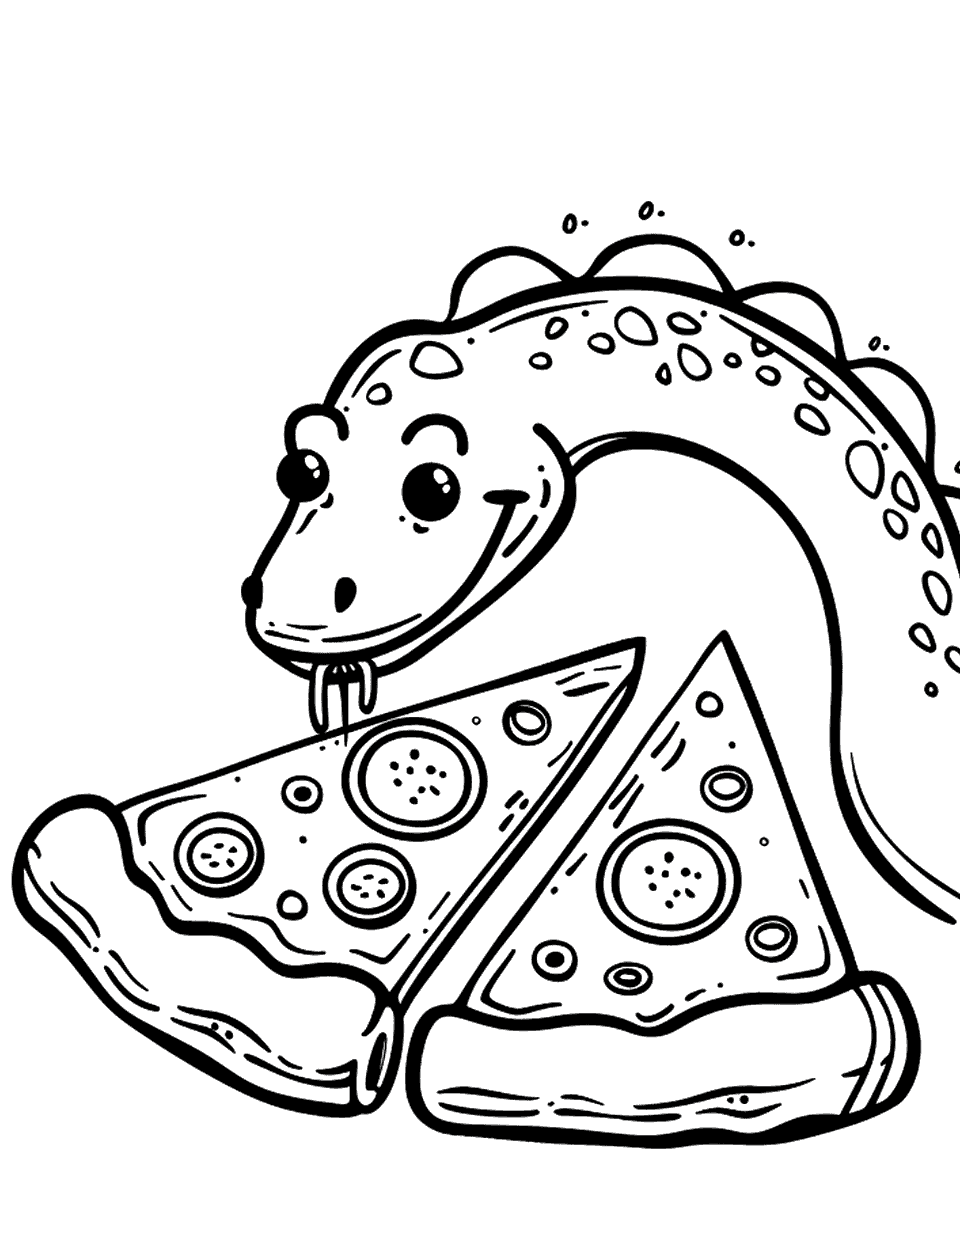 Dinosaur Eating Pizza Coloring Page - A friendly dinosaur enjoying a large pizza slice.